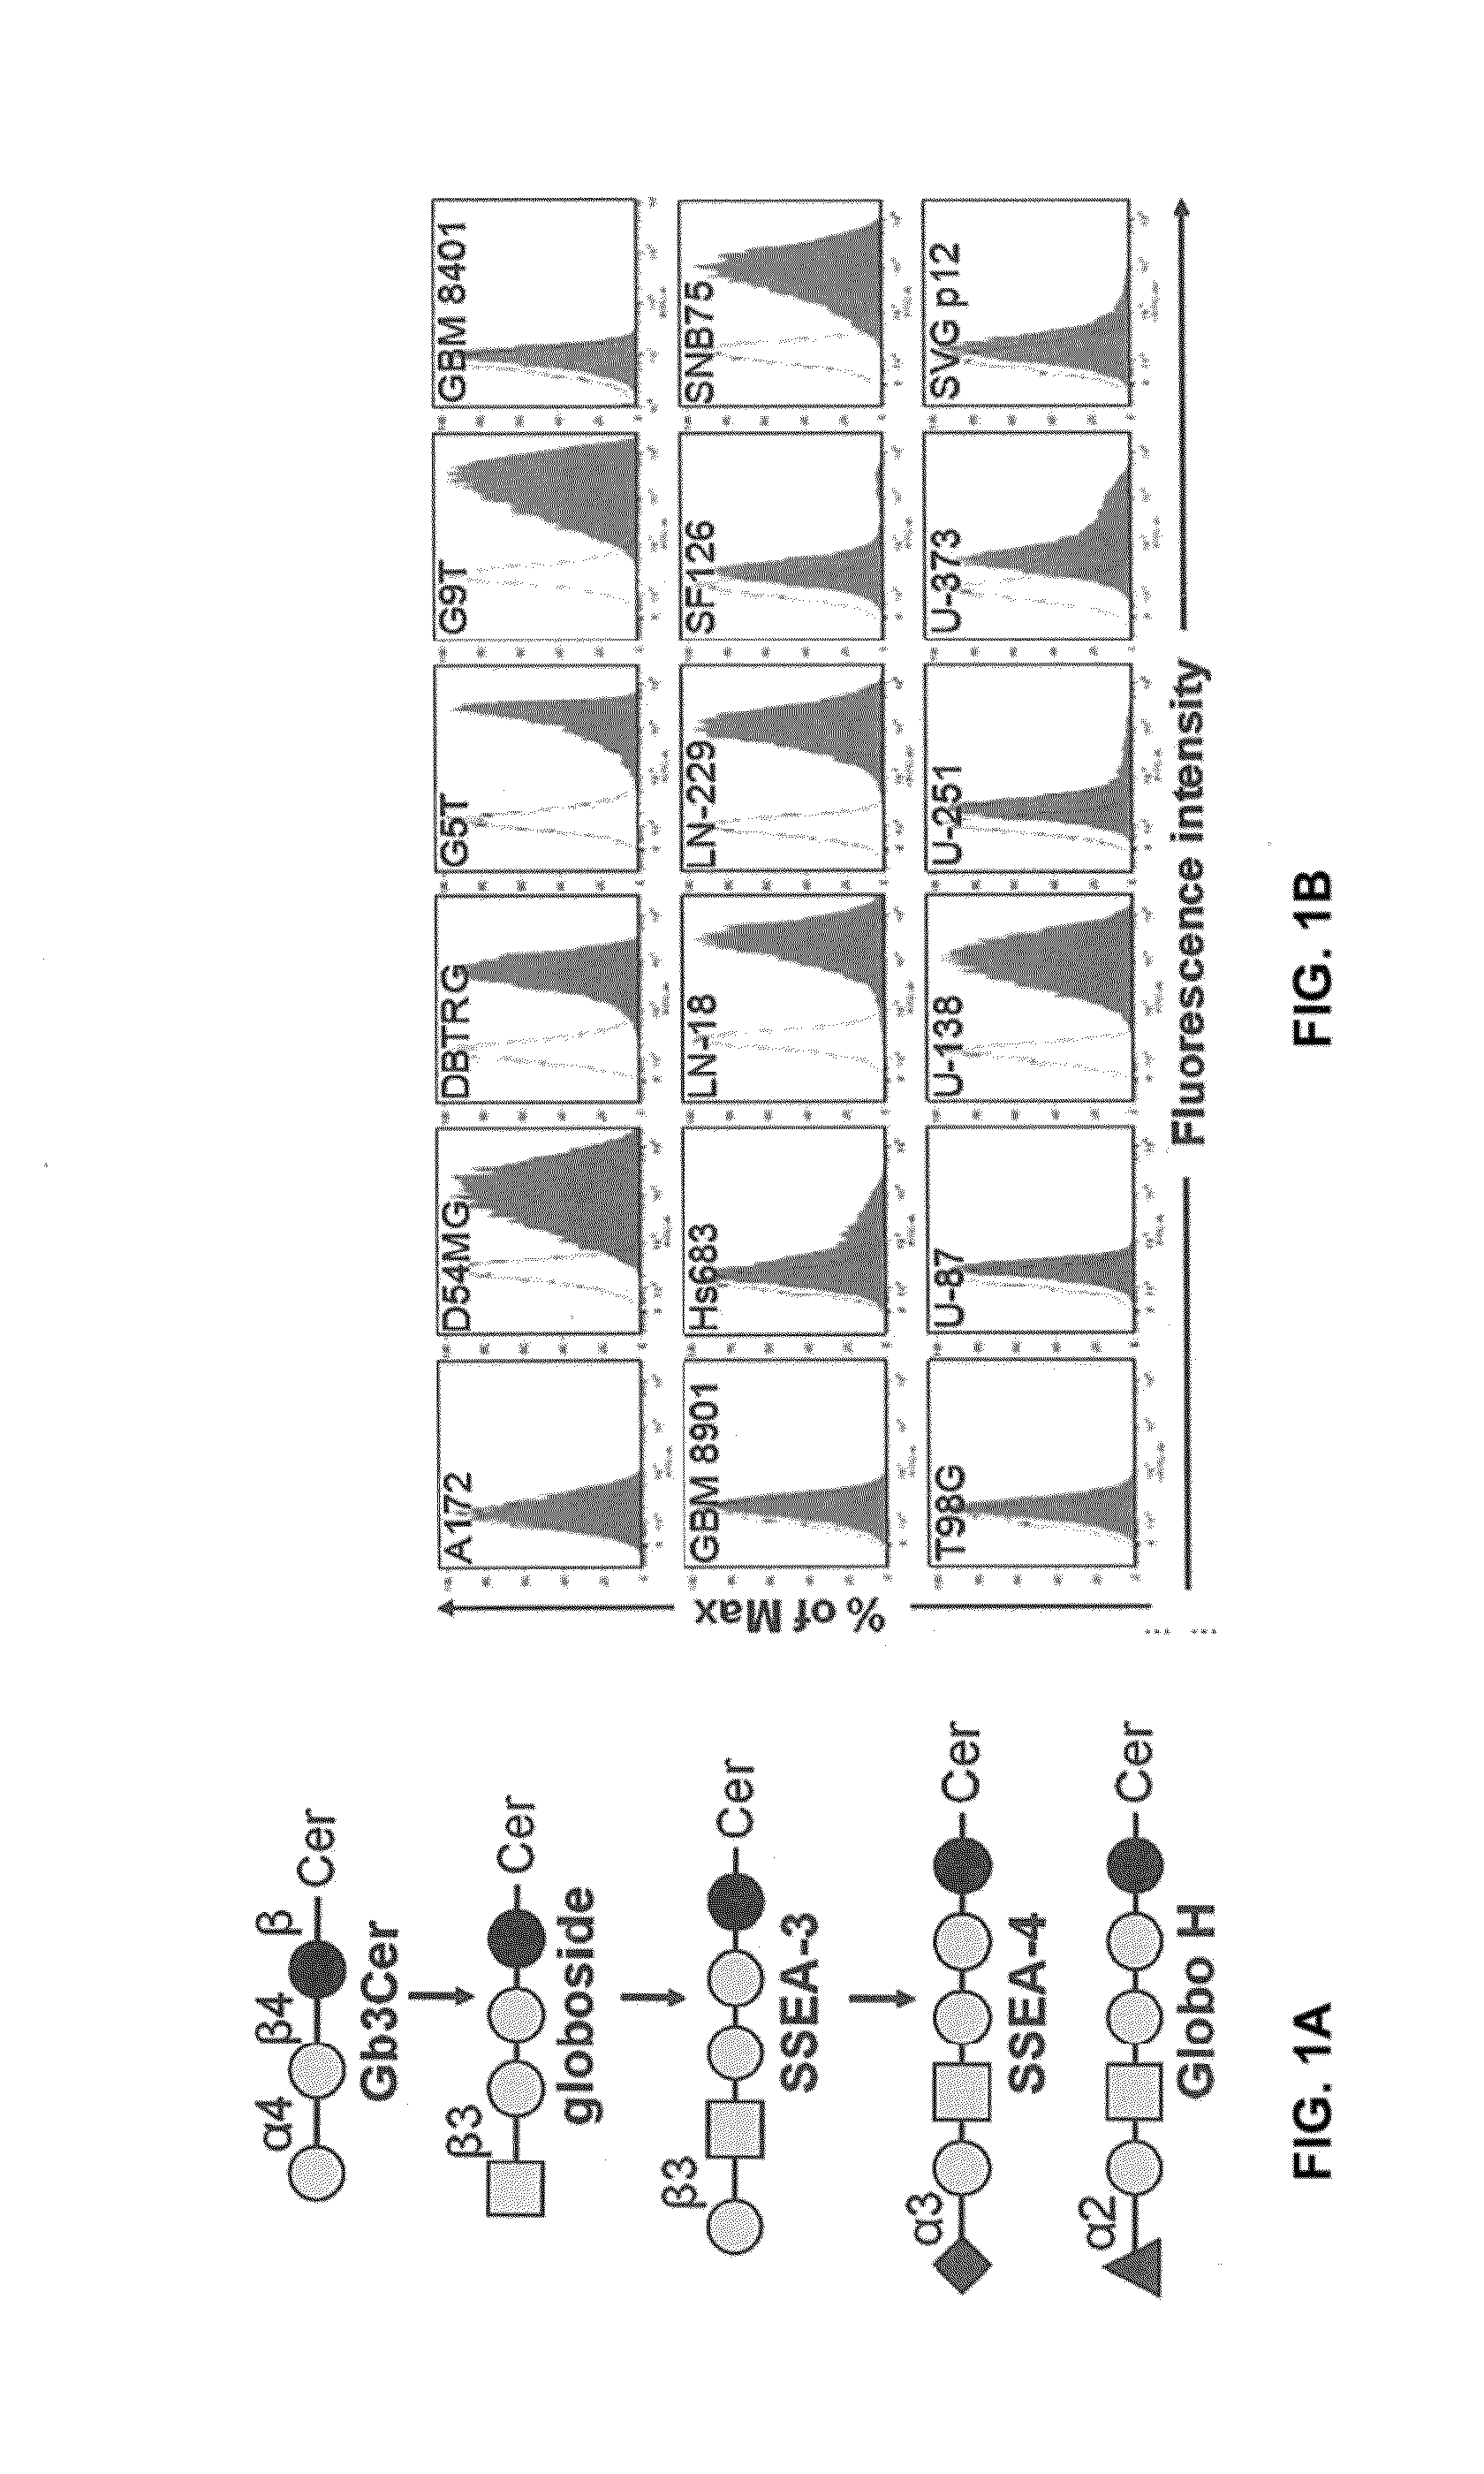 Compositions and methods for treatment and detection of cancers